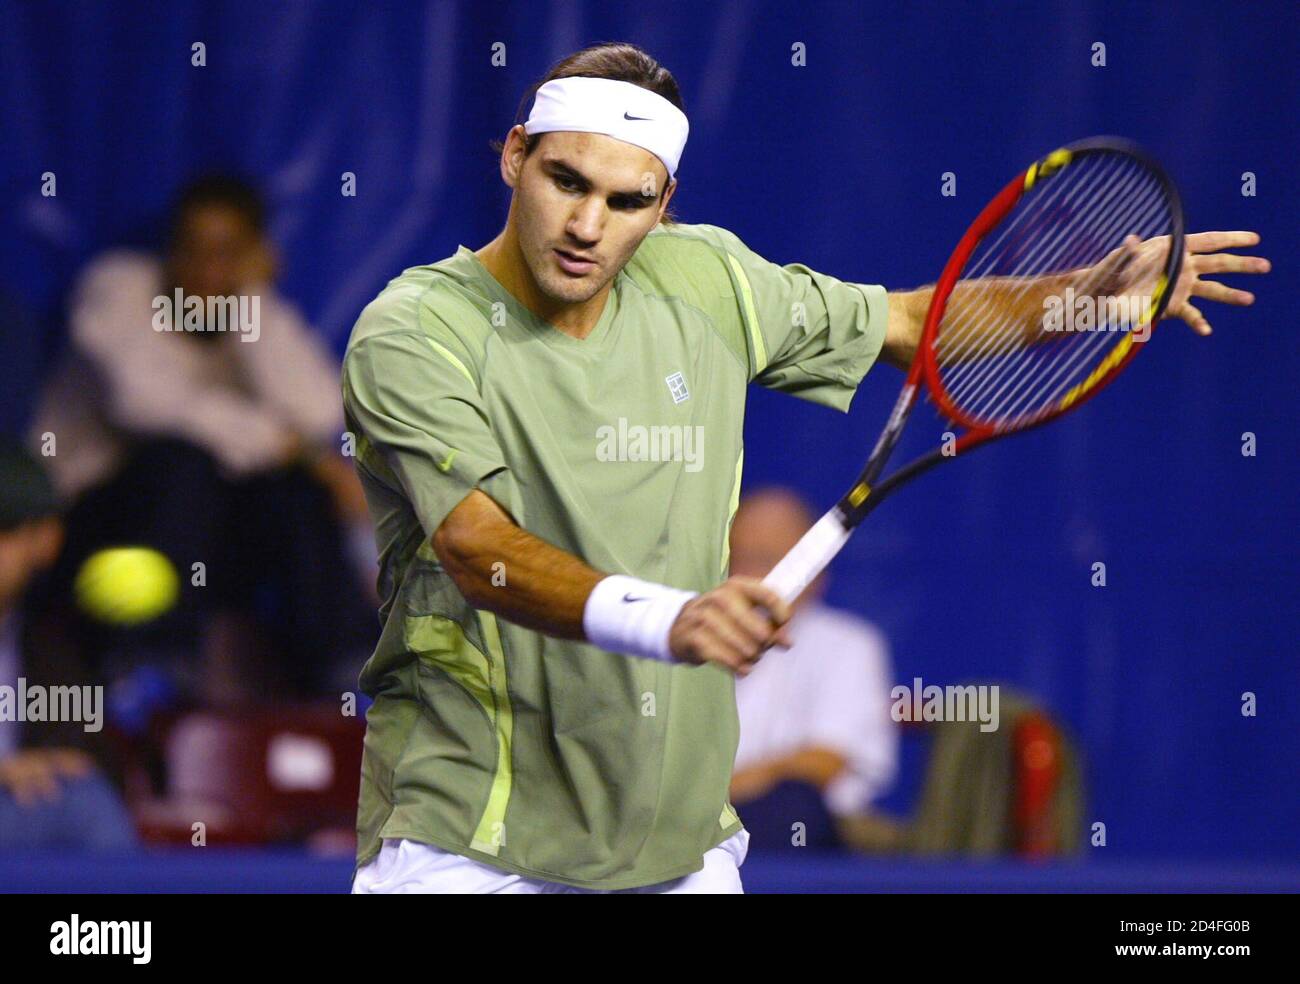 Roger Federer of Switzerland hits a backhand return to Xavier Malisse of  Belgium in their first round match at the Tennis Masters Paris ATP indoor  tournament at Bercy'stadium, October 30, 2002. Federer